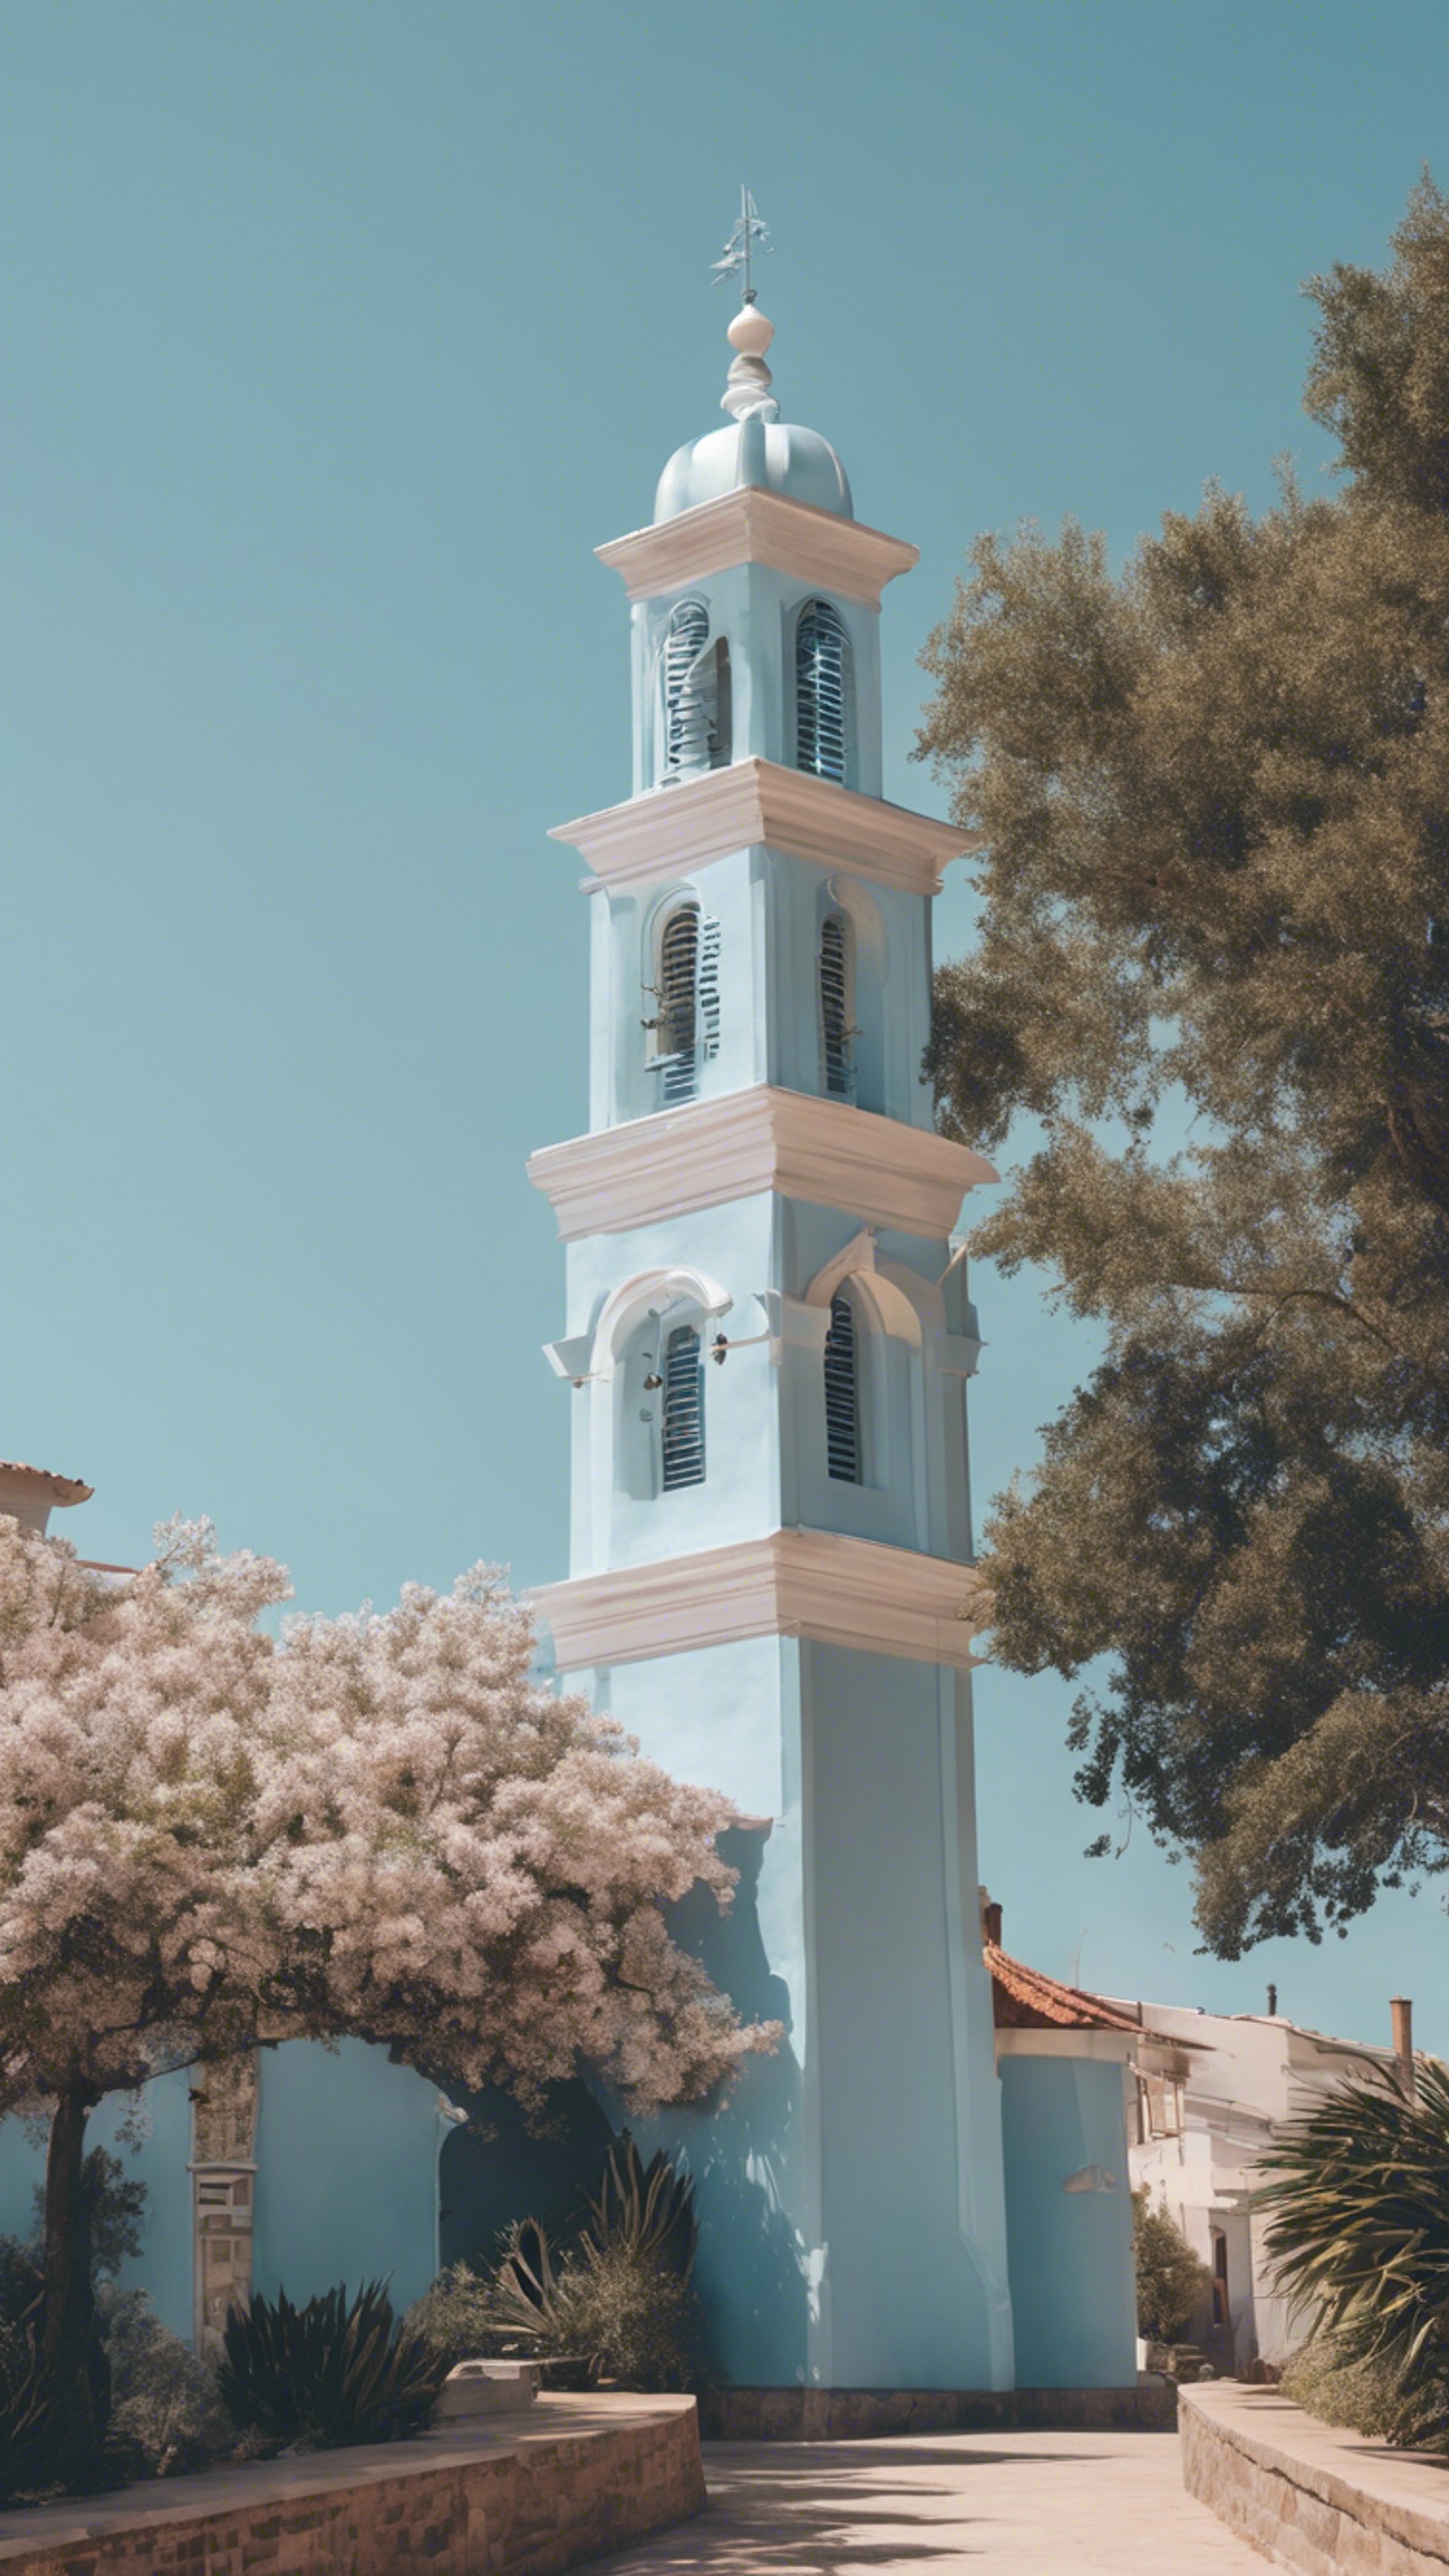 A stately pastel blue bell tower against a clear, sunny sky in a coastal town. Tapeta[a05c52dcc3054b35b6be]